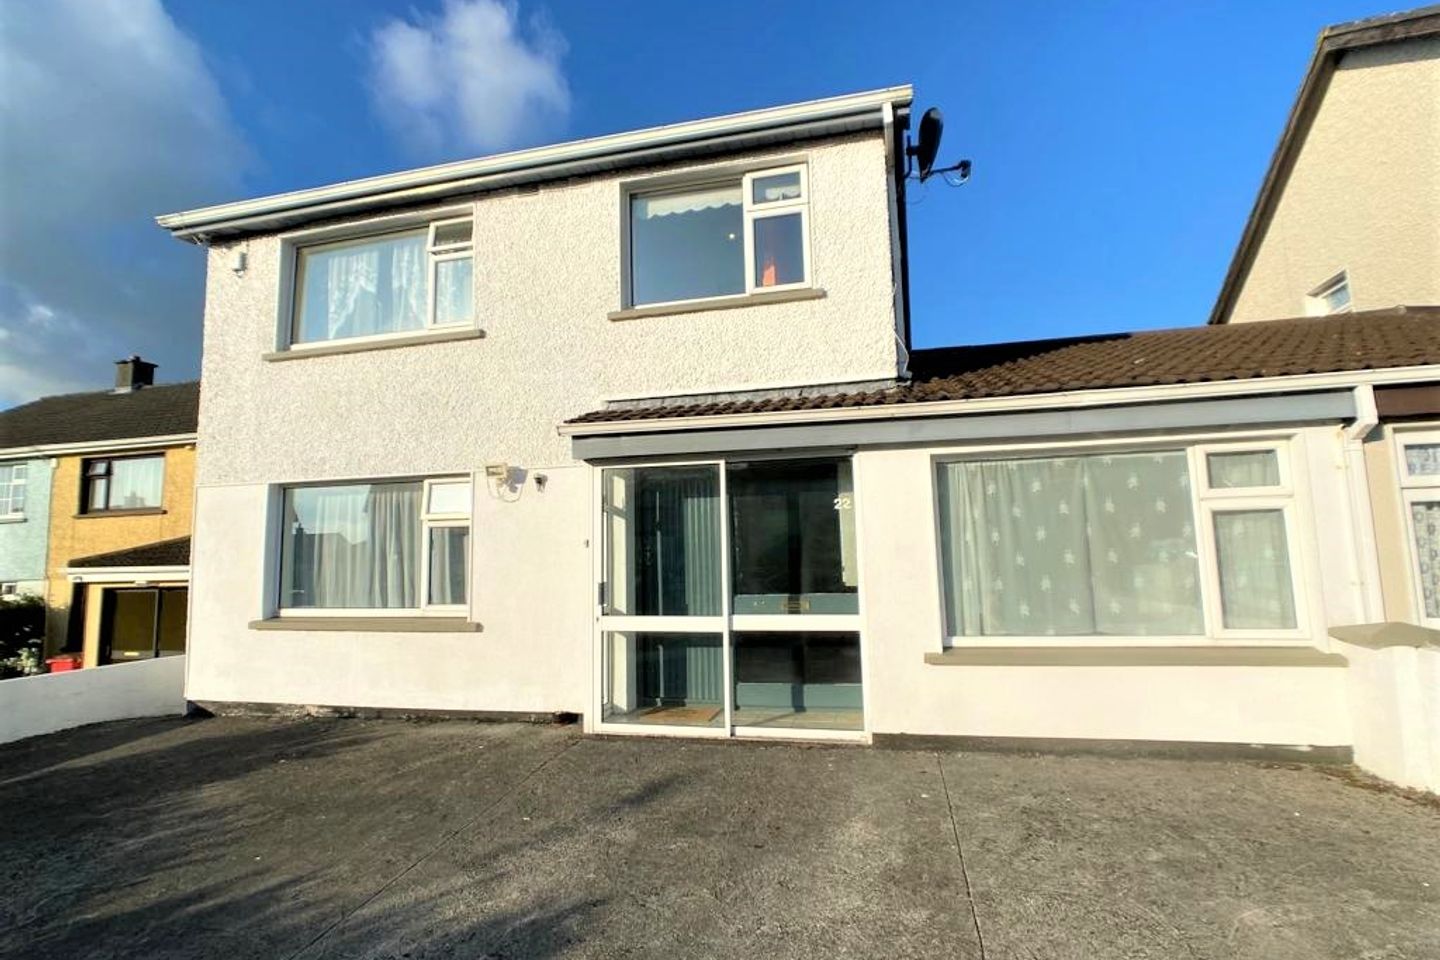 22 Glenview Drive, Riverside, Tuam Road, Co. Galway